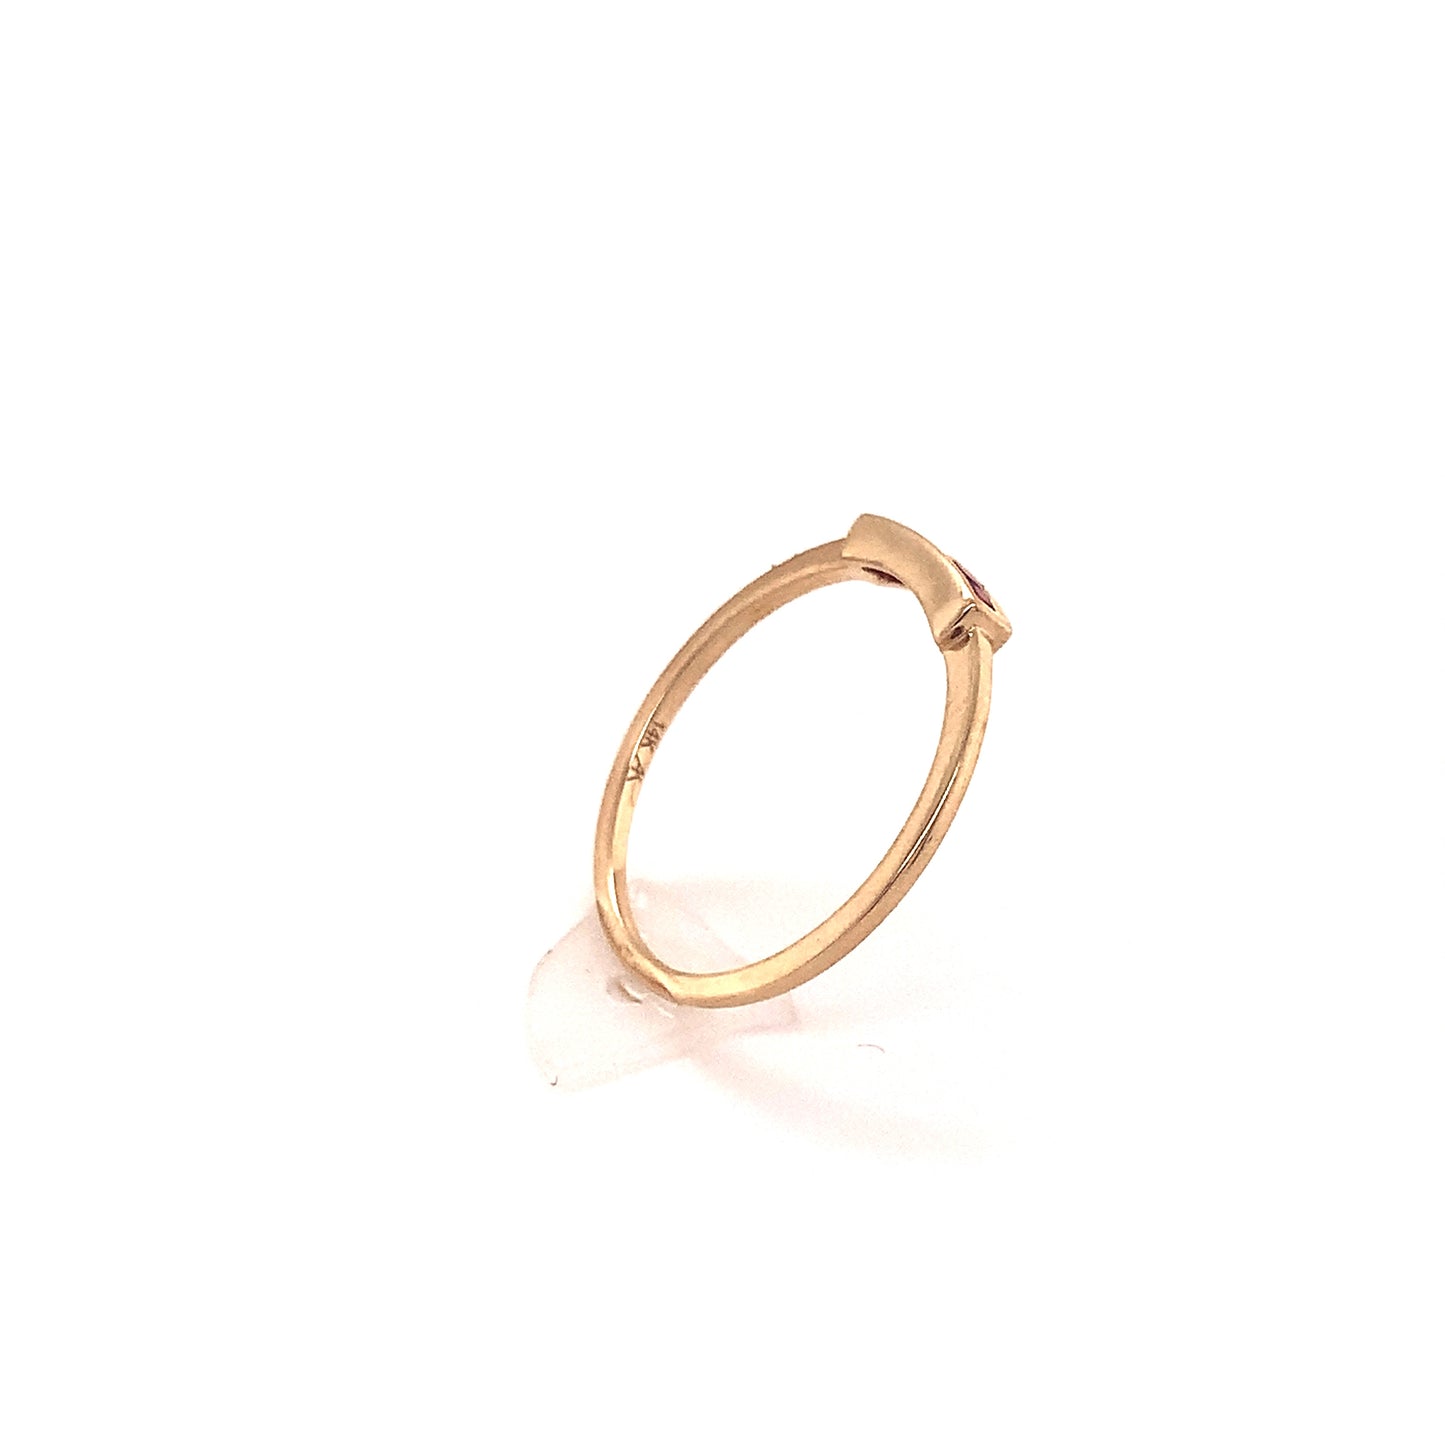 14K Gold Ring with Rubies